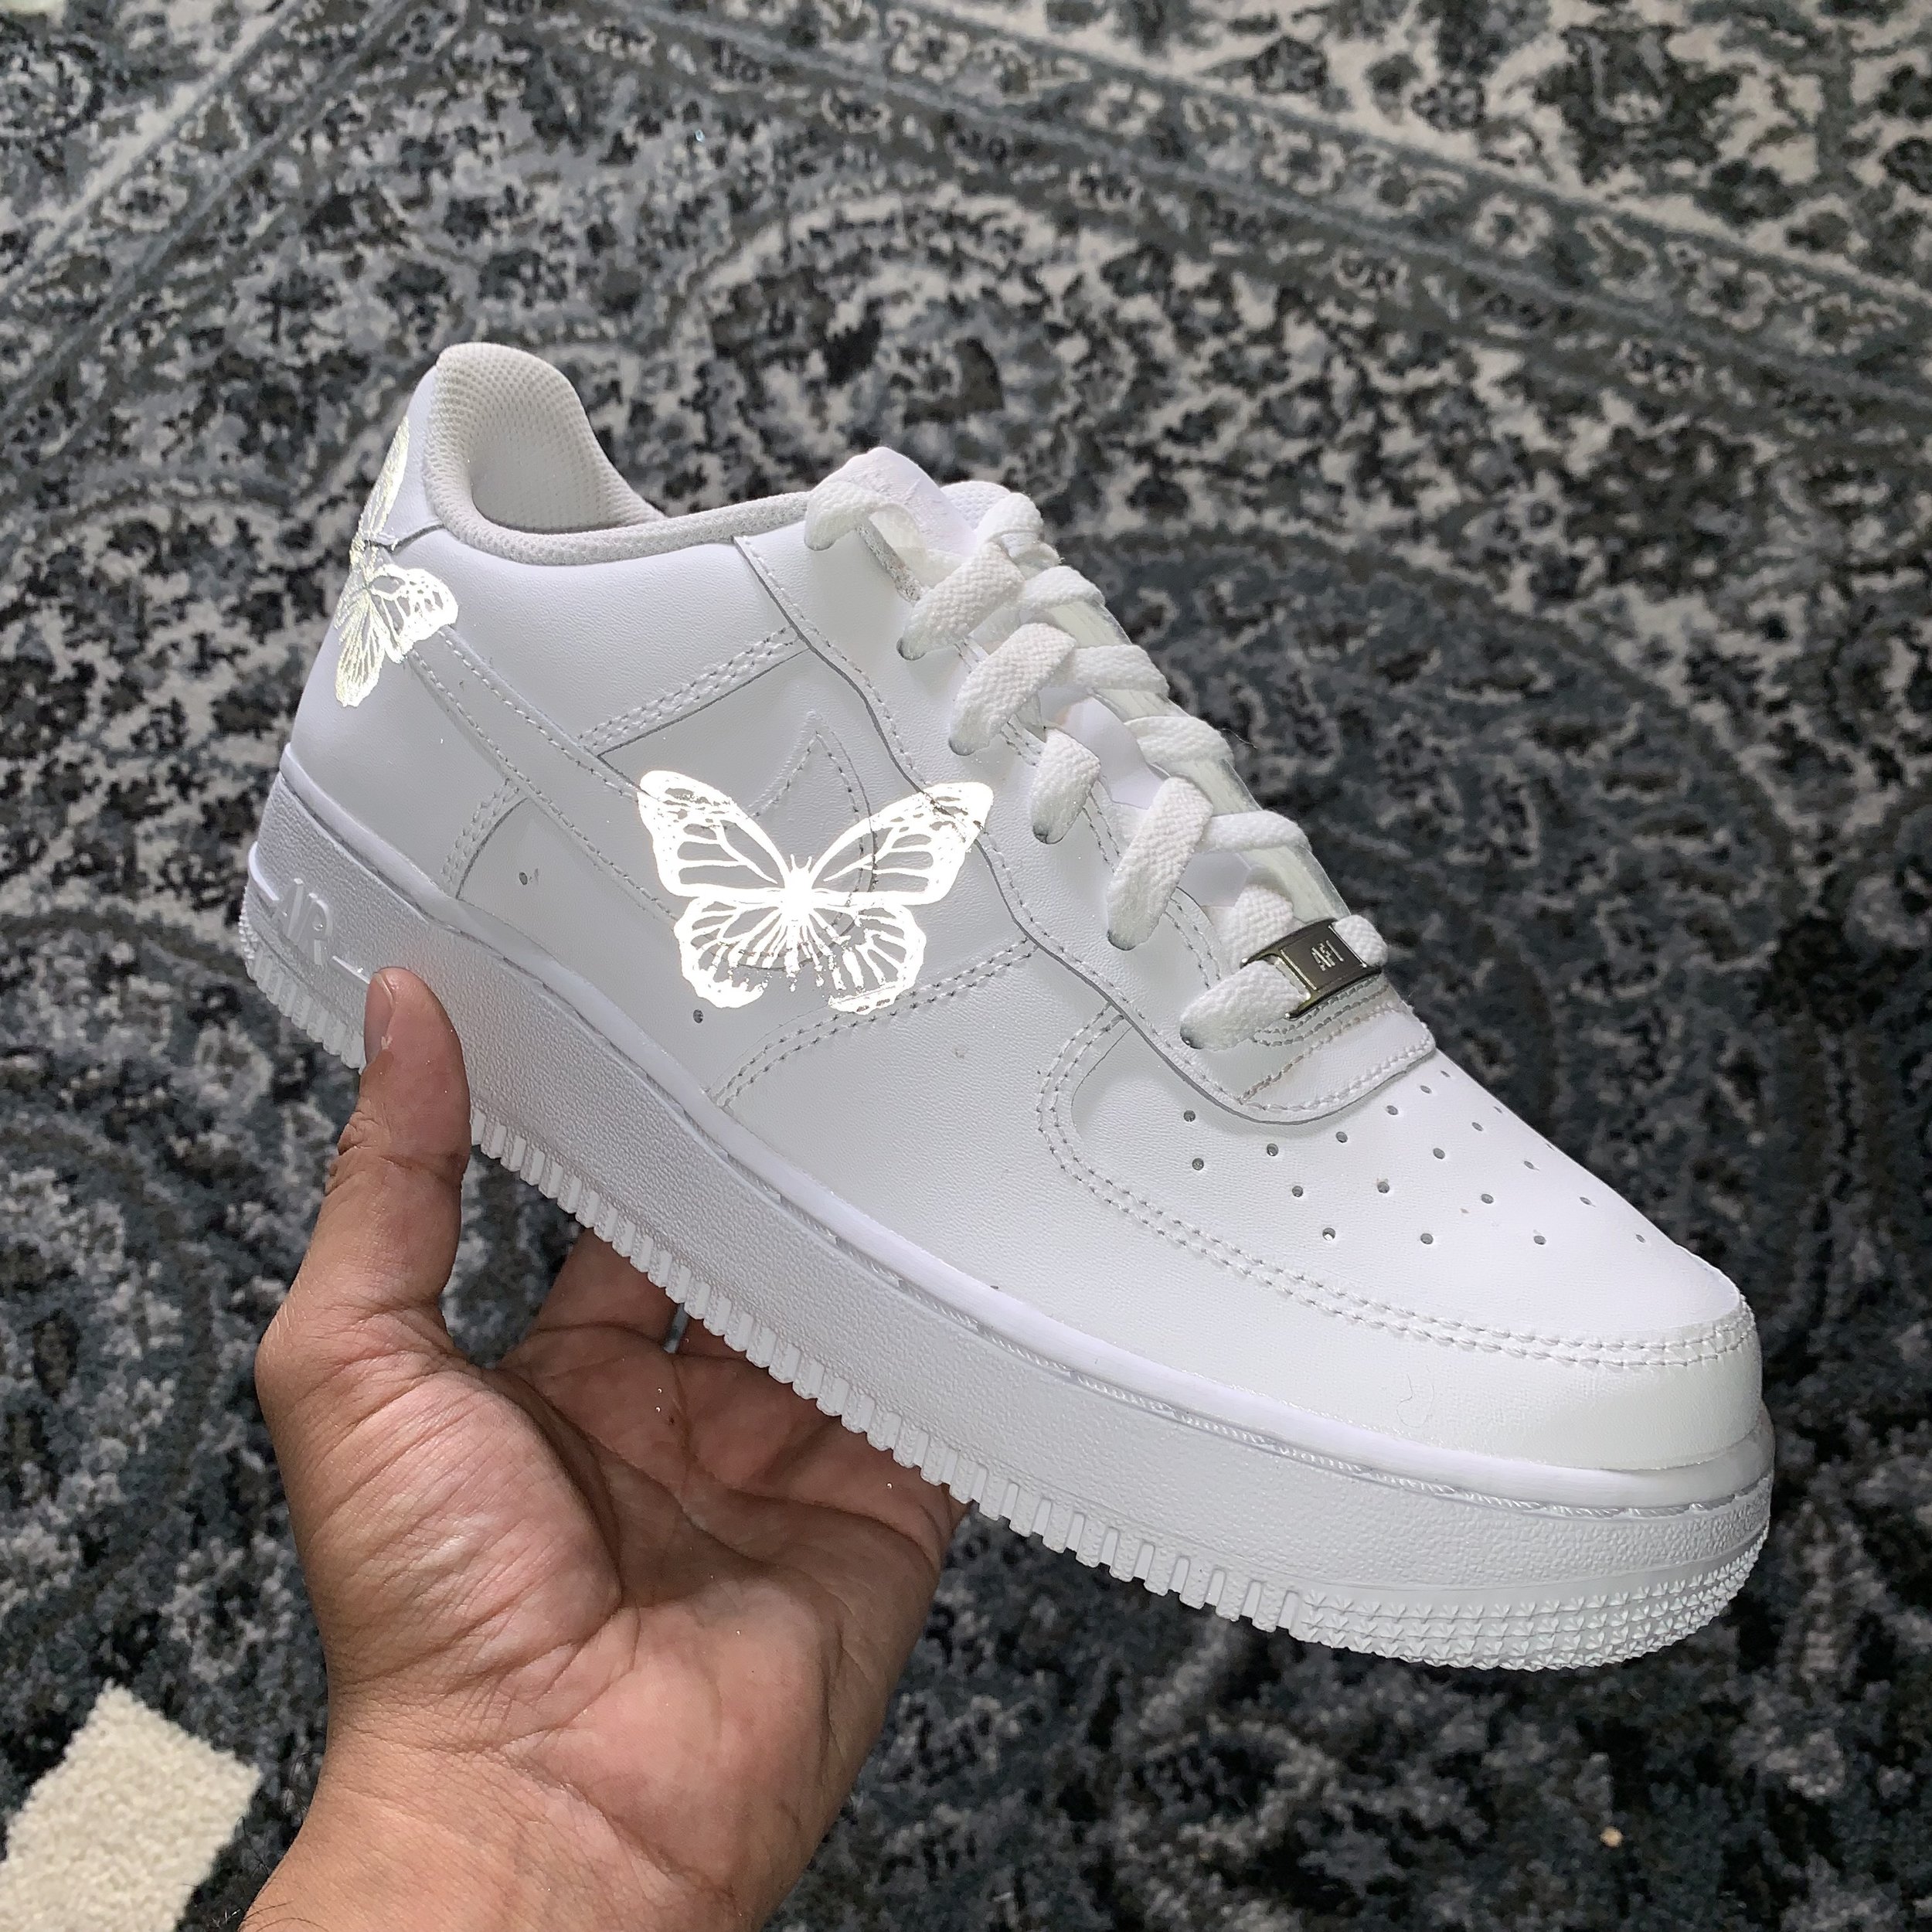 3M Limited HD Reflective Butterfly Air 